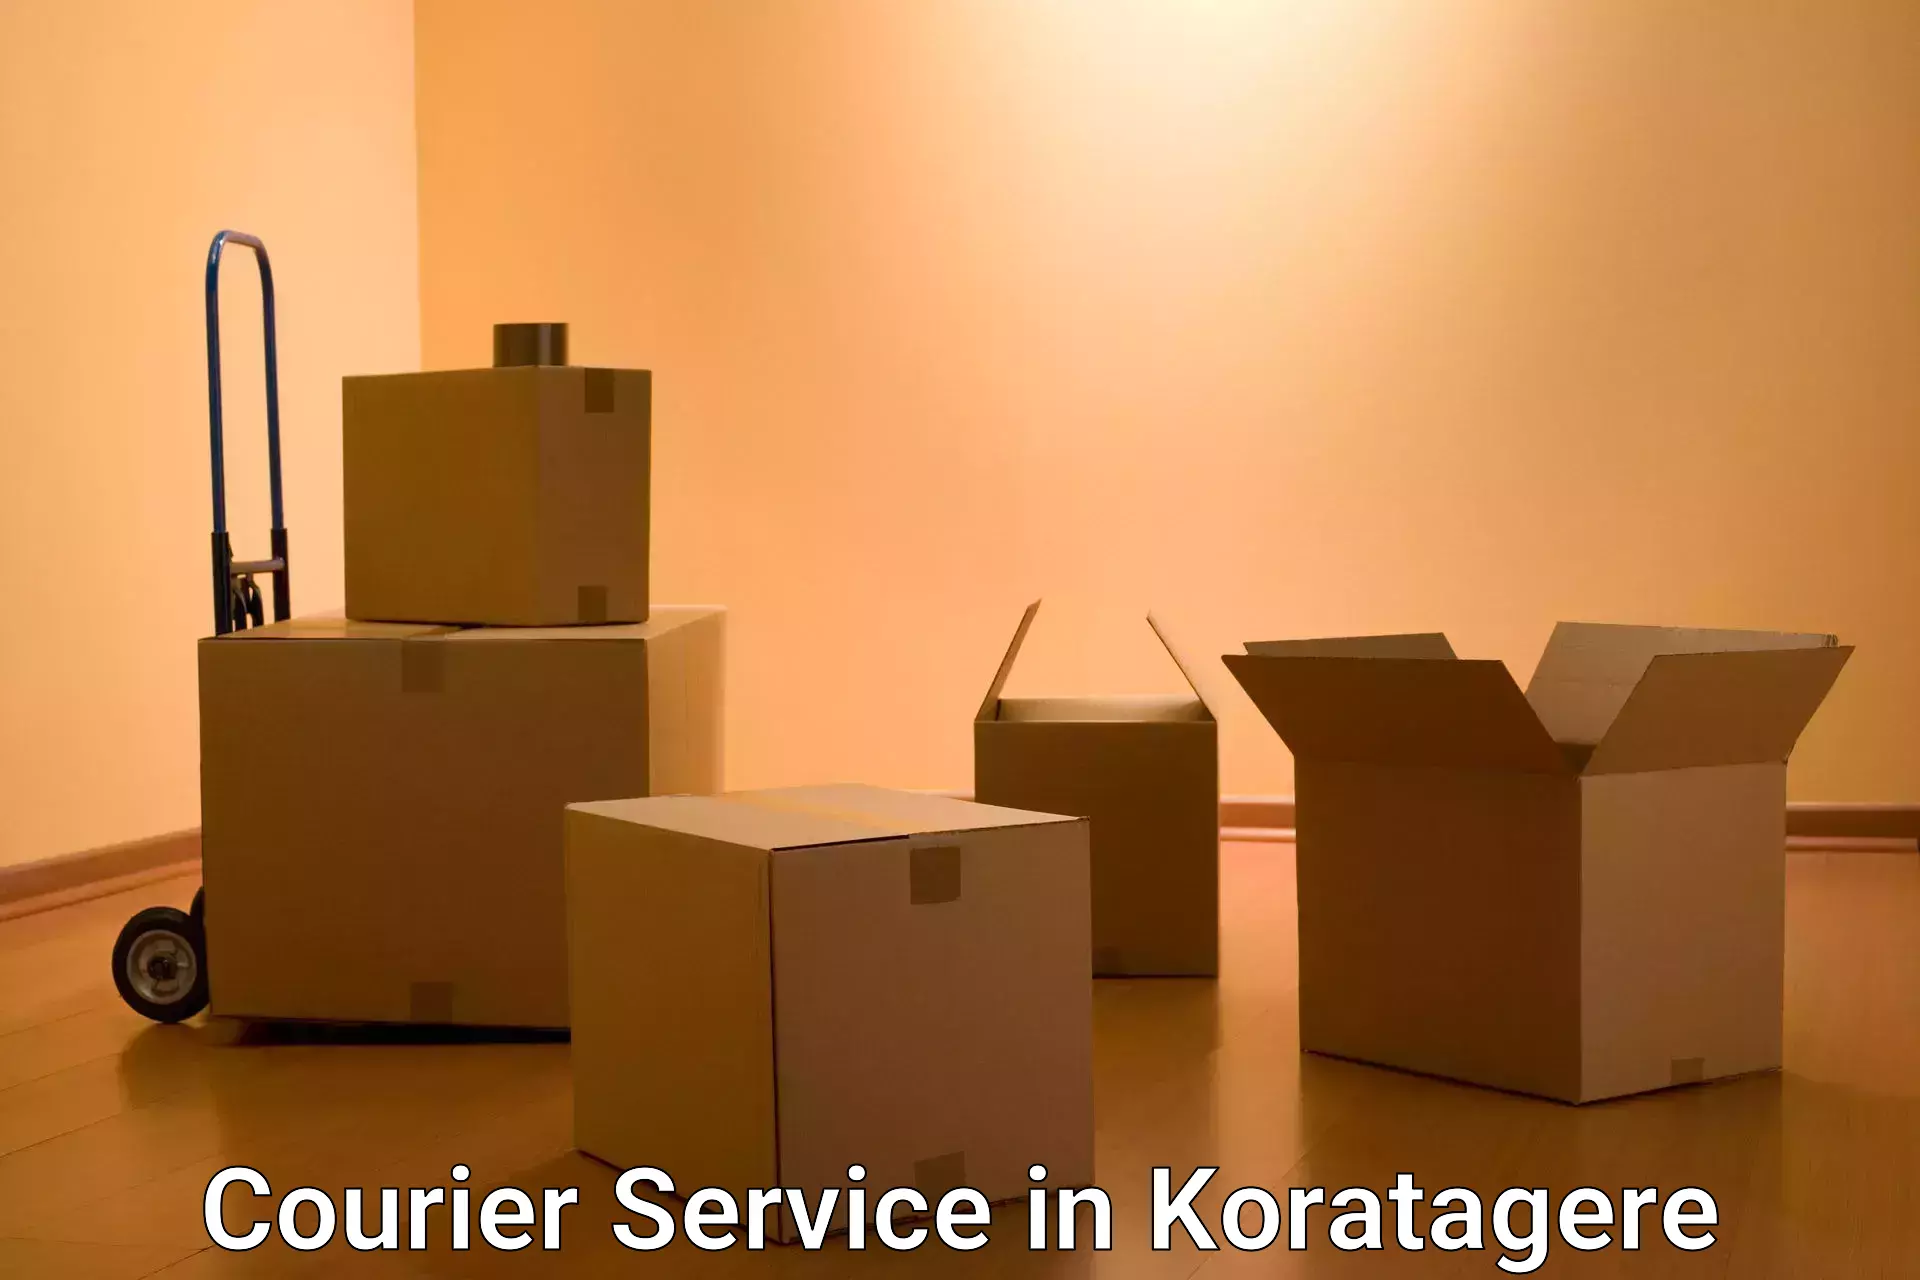 Express logistics providers in Koratagere